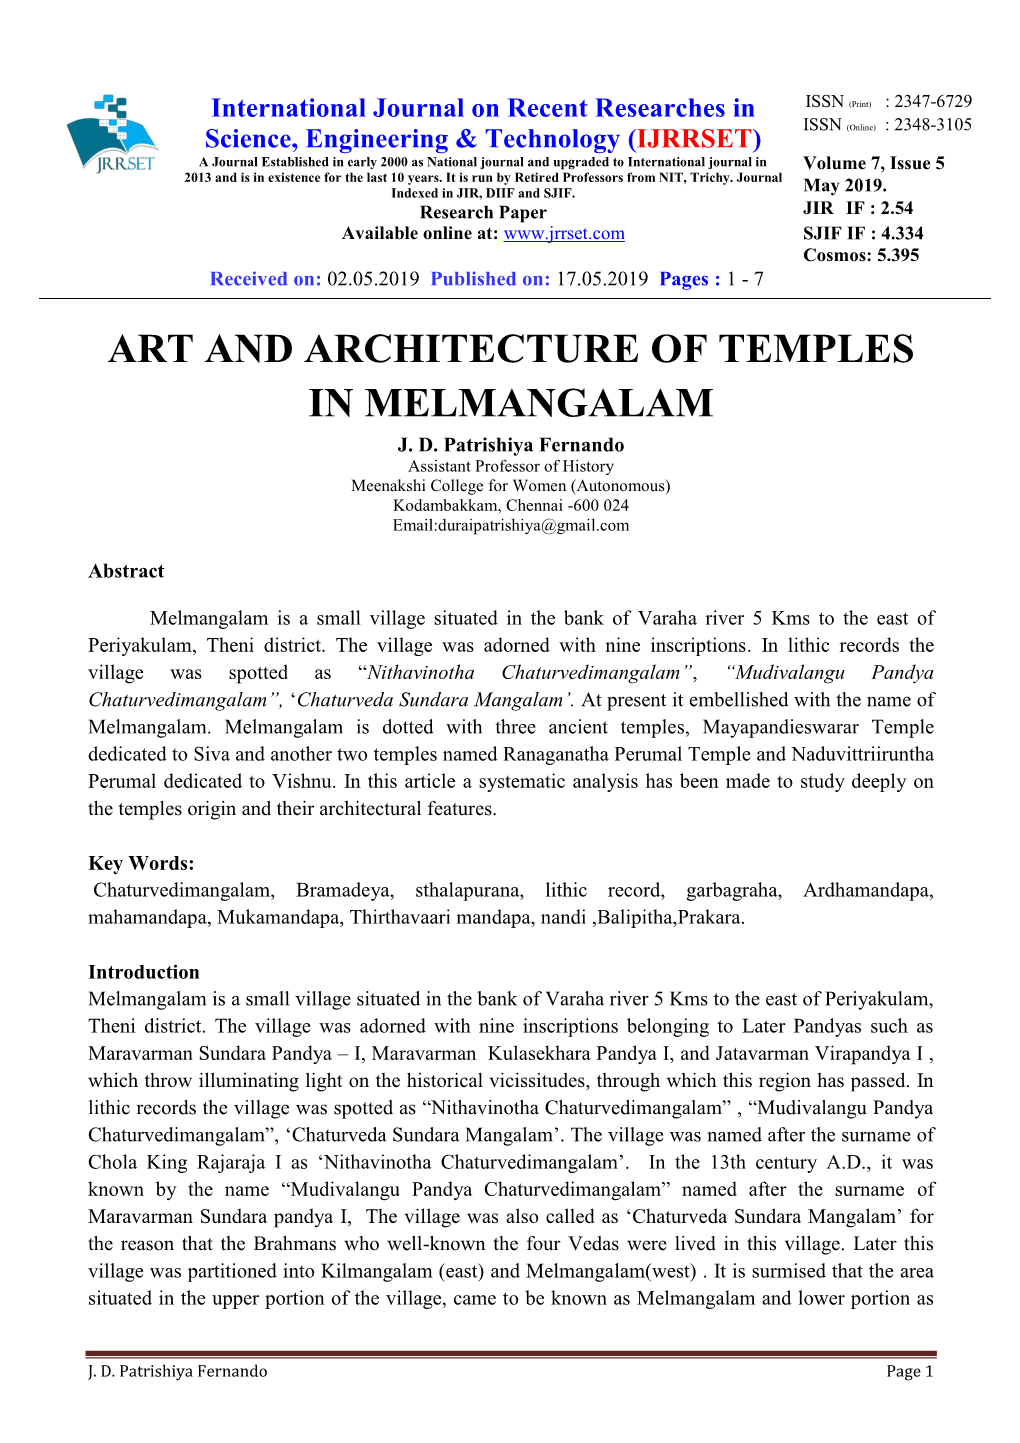 Art and Architecture of Temples in Melmangalam J